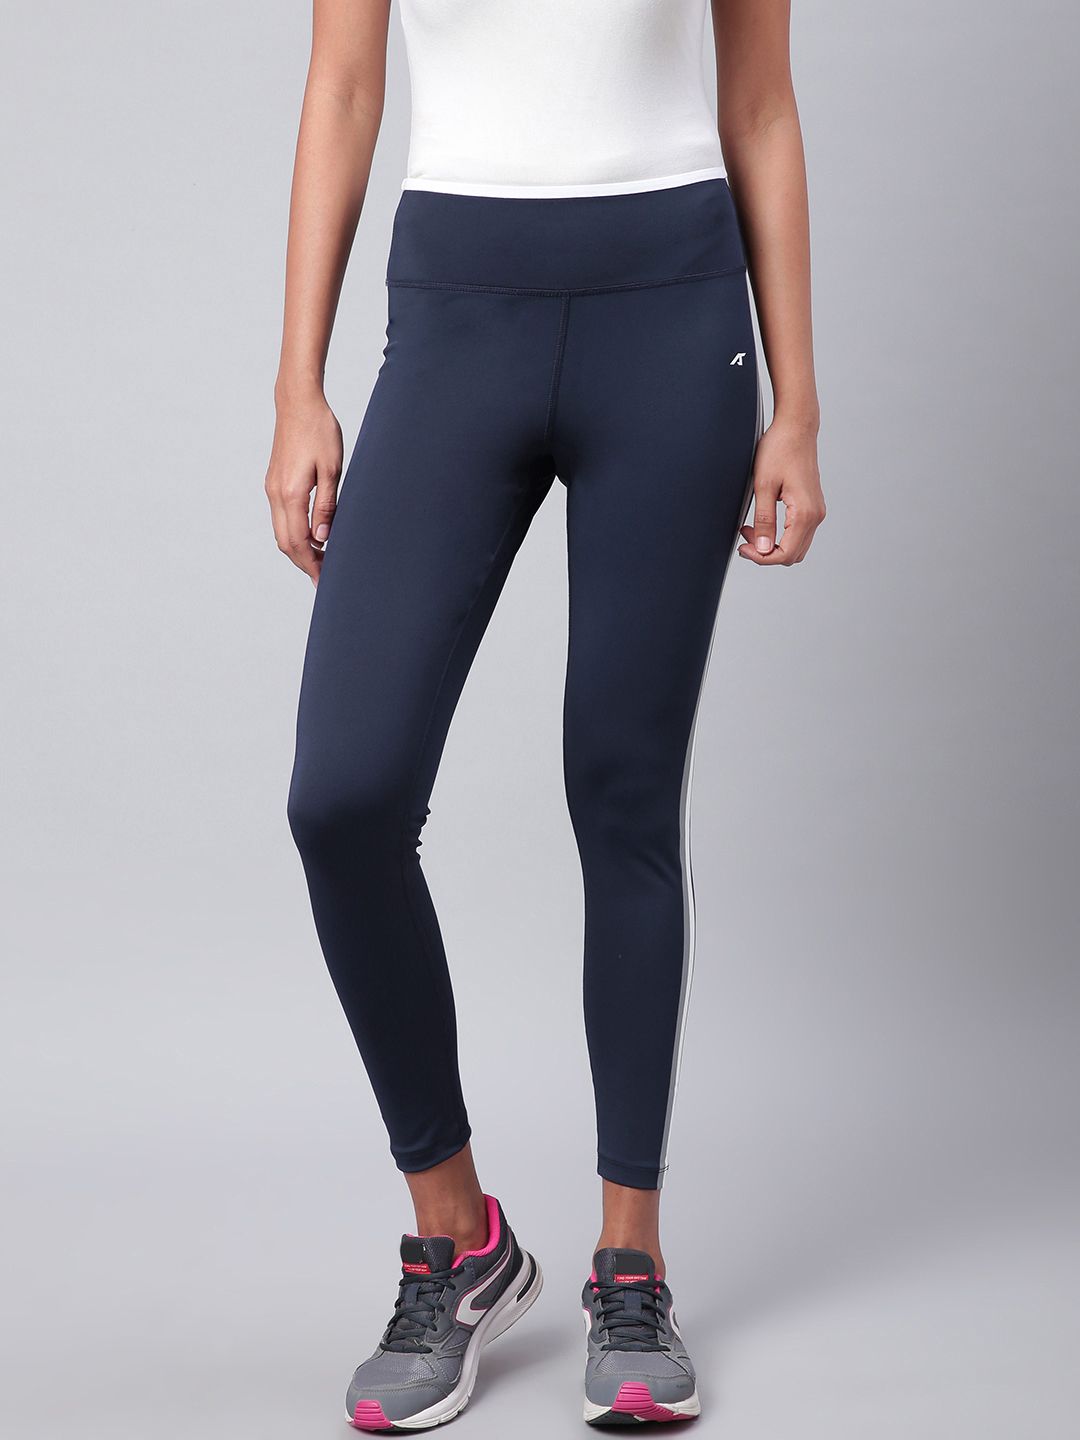 Alcis Women Navy Blue Solid Secure Fit Cropped Training Tights Price in India